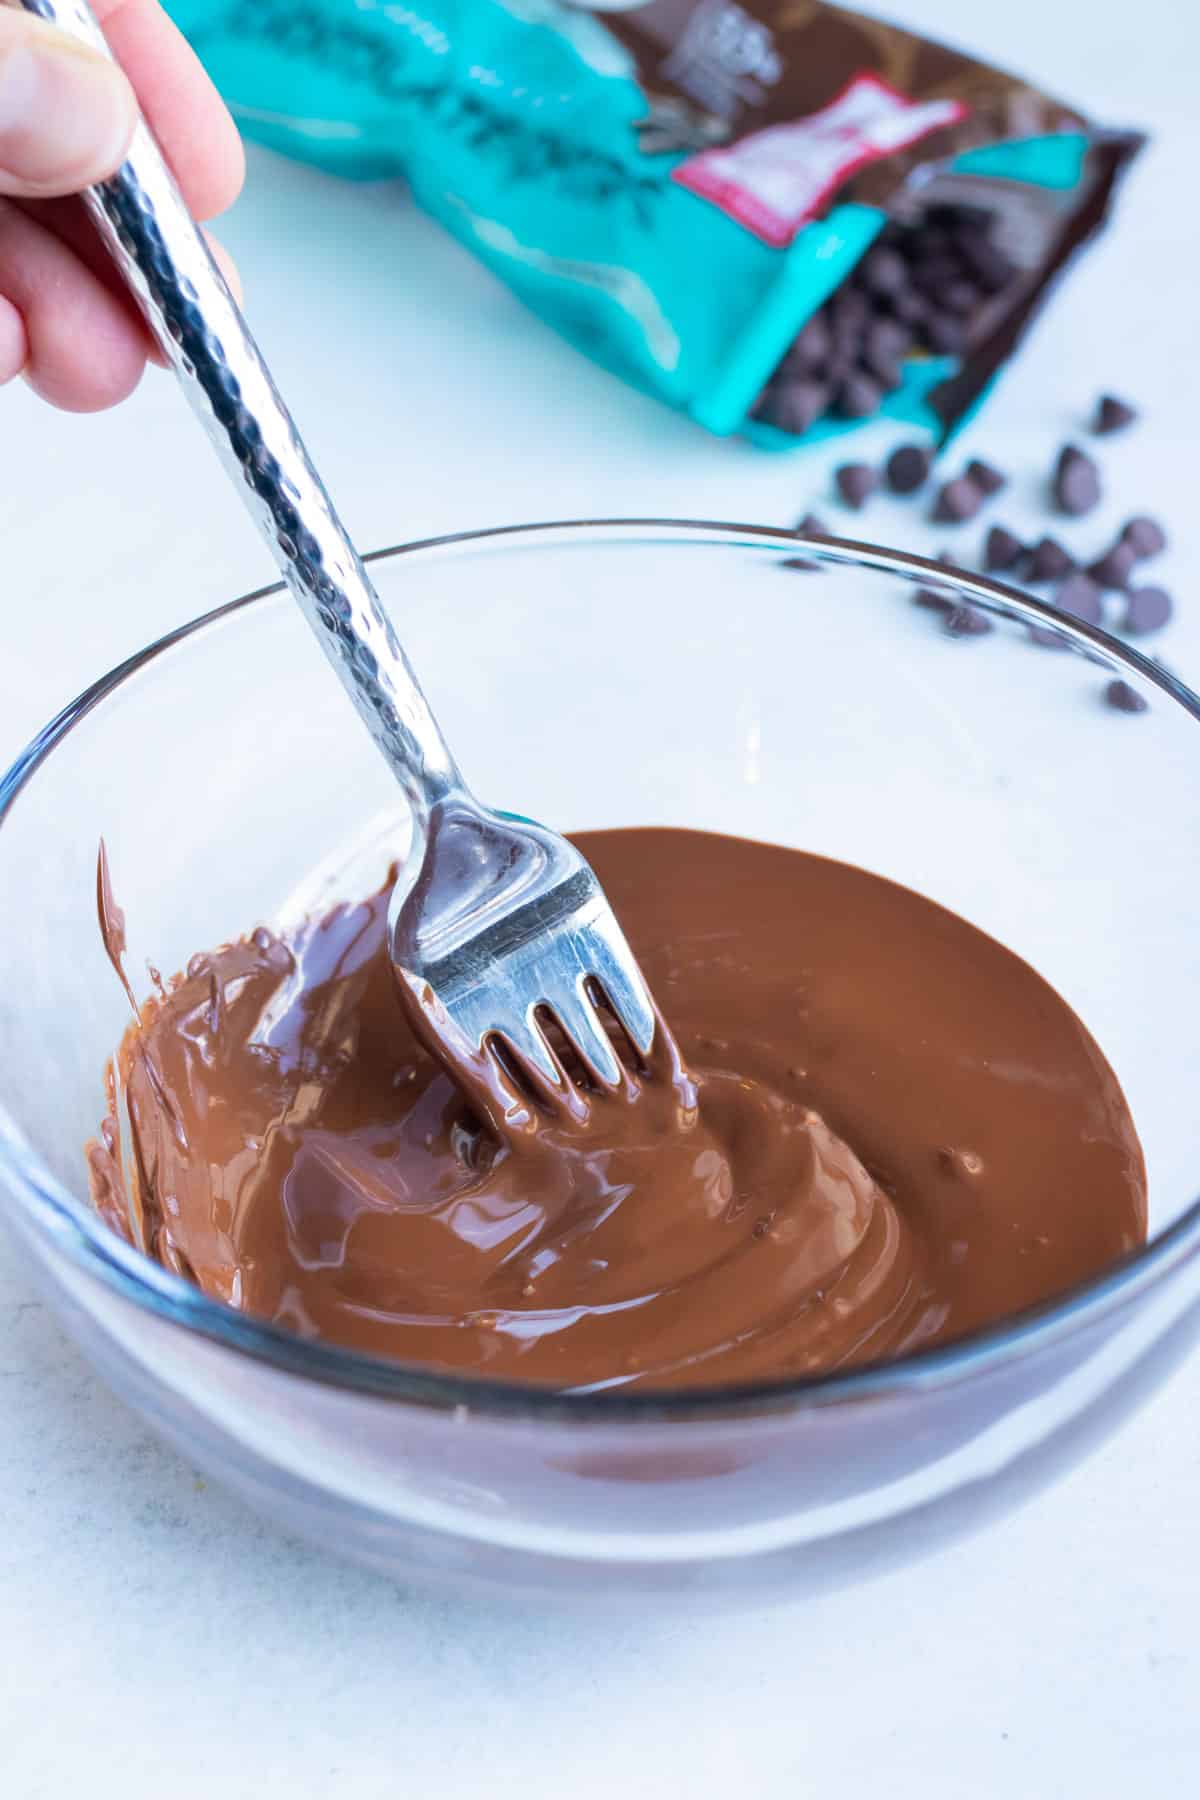 Chocolate chips are melted in a glass bowl before adding to this healthy nutella recipe.